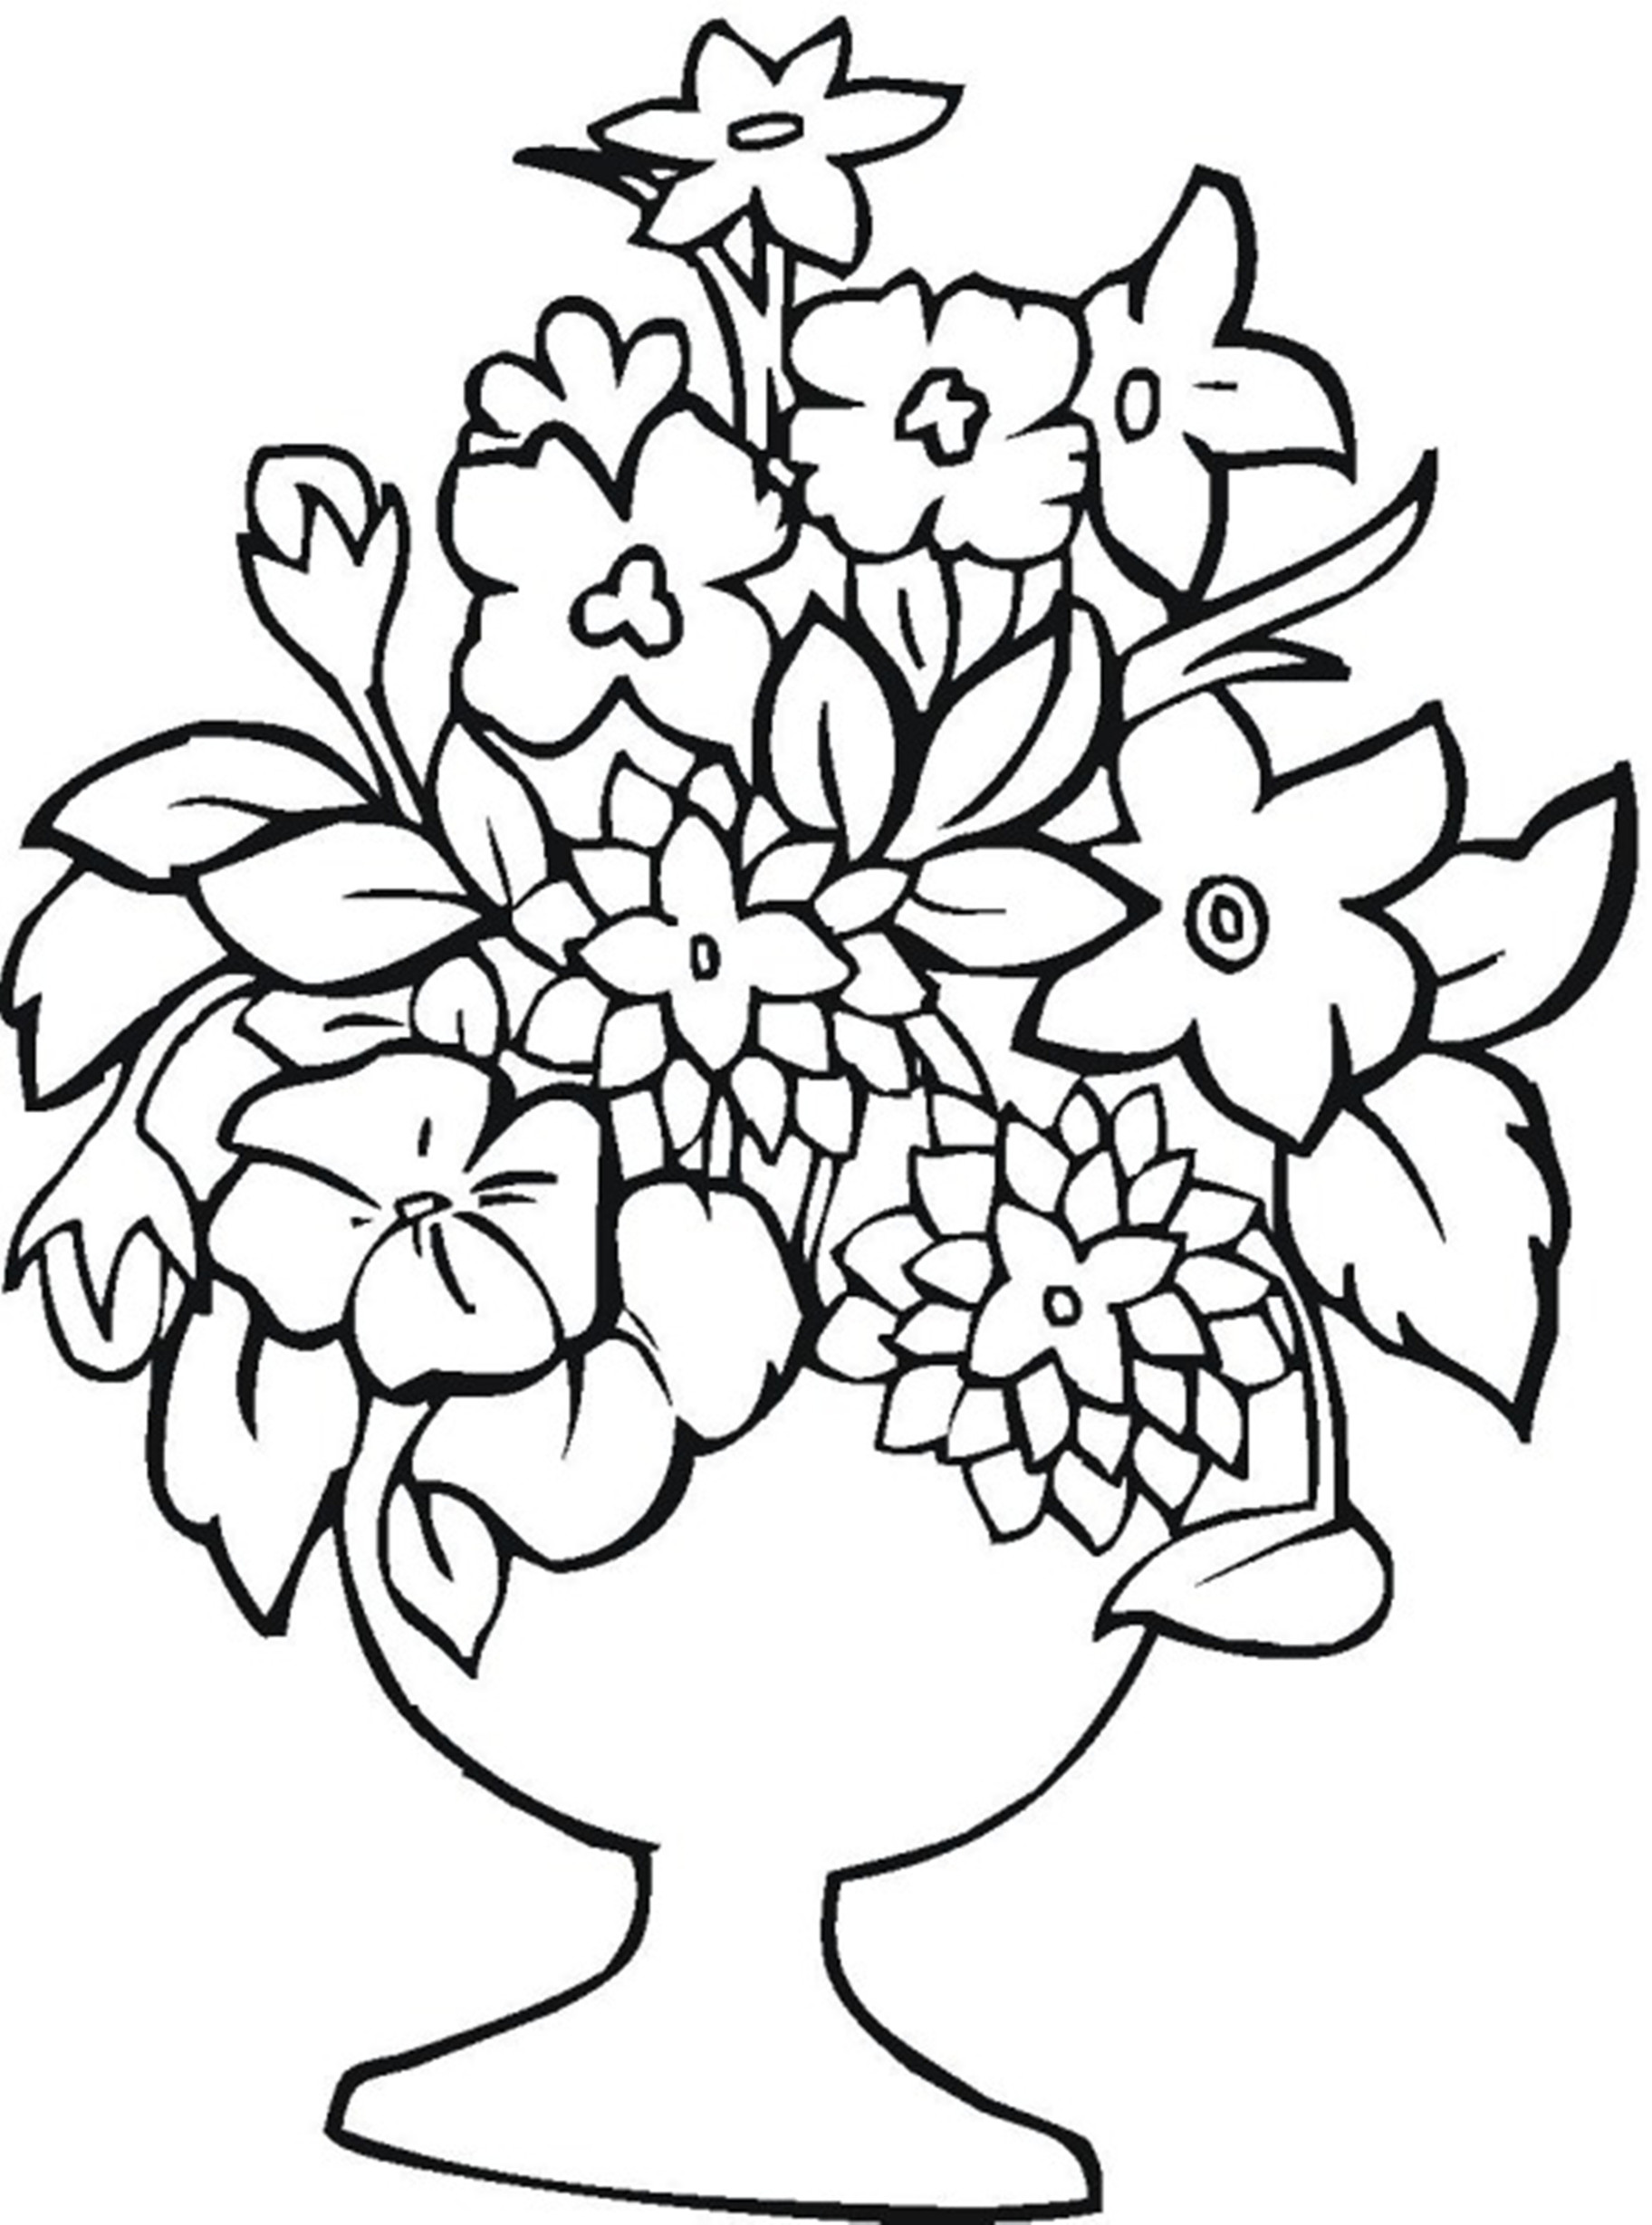 Coloring Flowers For Kids
 Free Printable Flower Coloring Pages For Kids Best